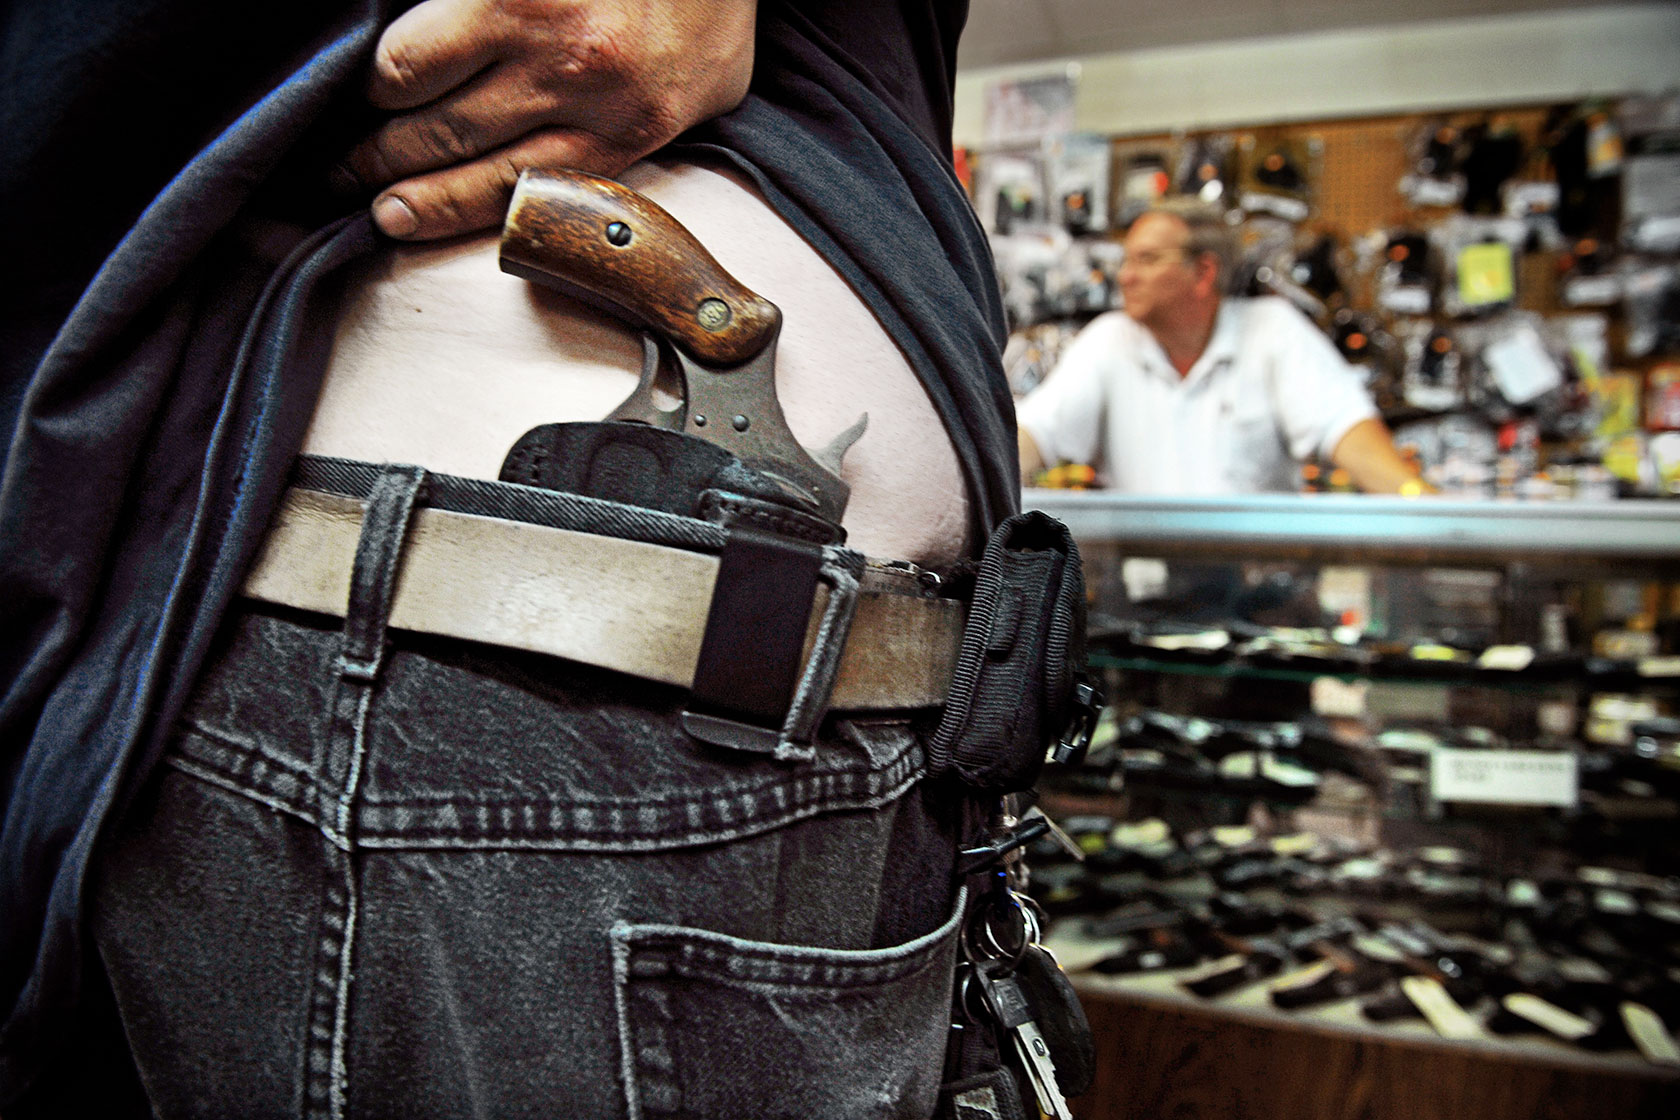 Frequently Asked Questions About Permitless Carry - Center for